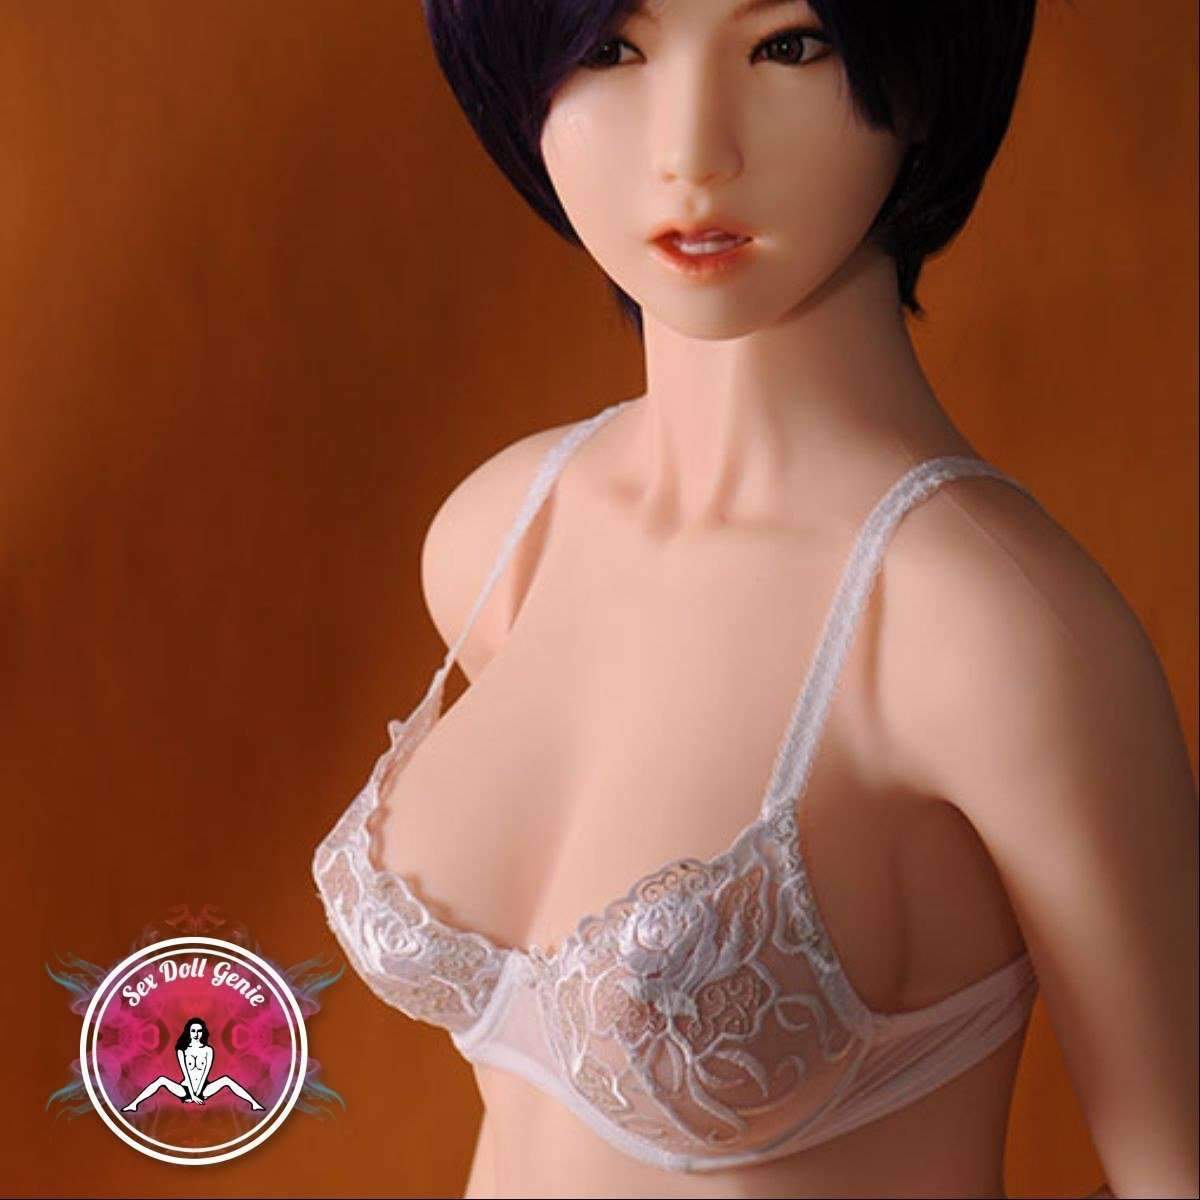 DS Doll - 158Plus - Thera Head - Type 1 D Cup Silicone Doll-8